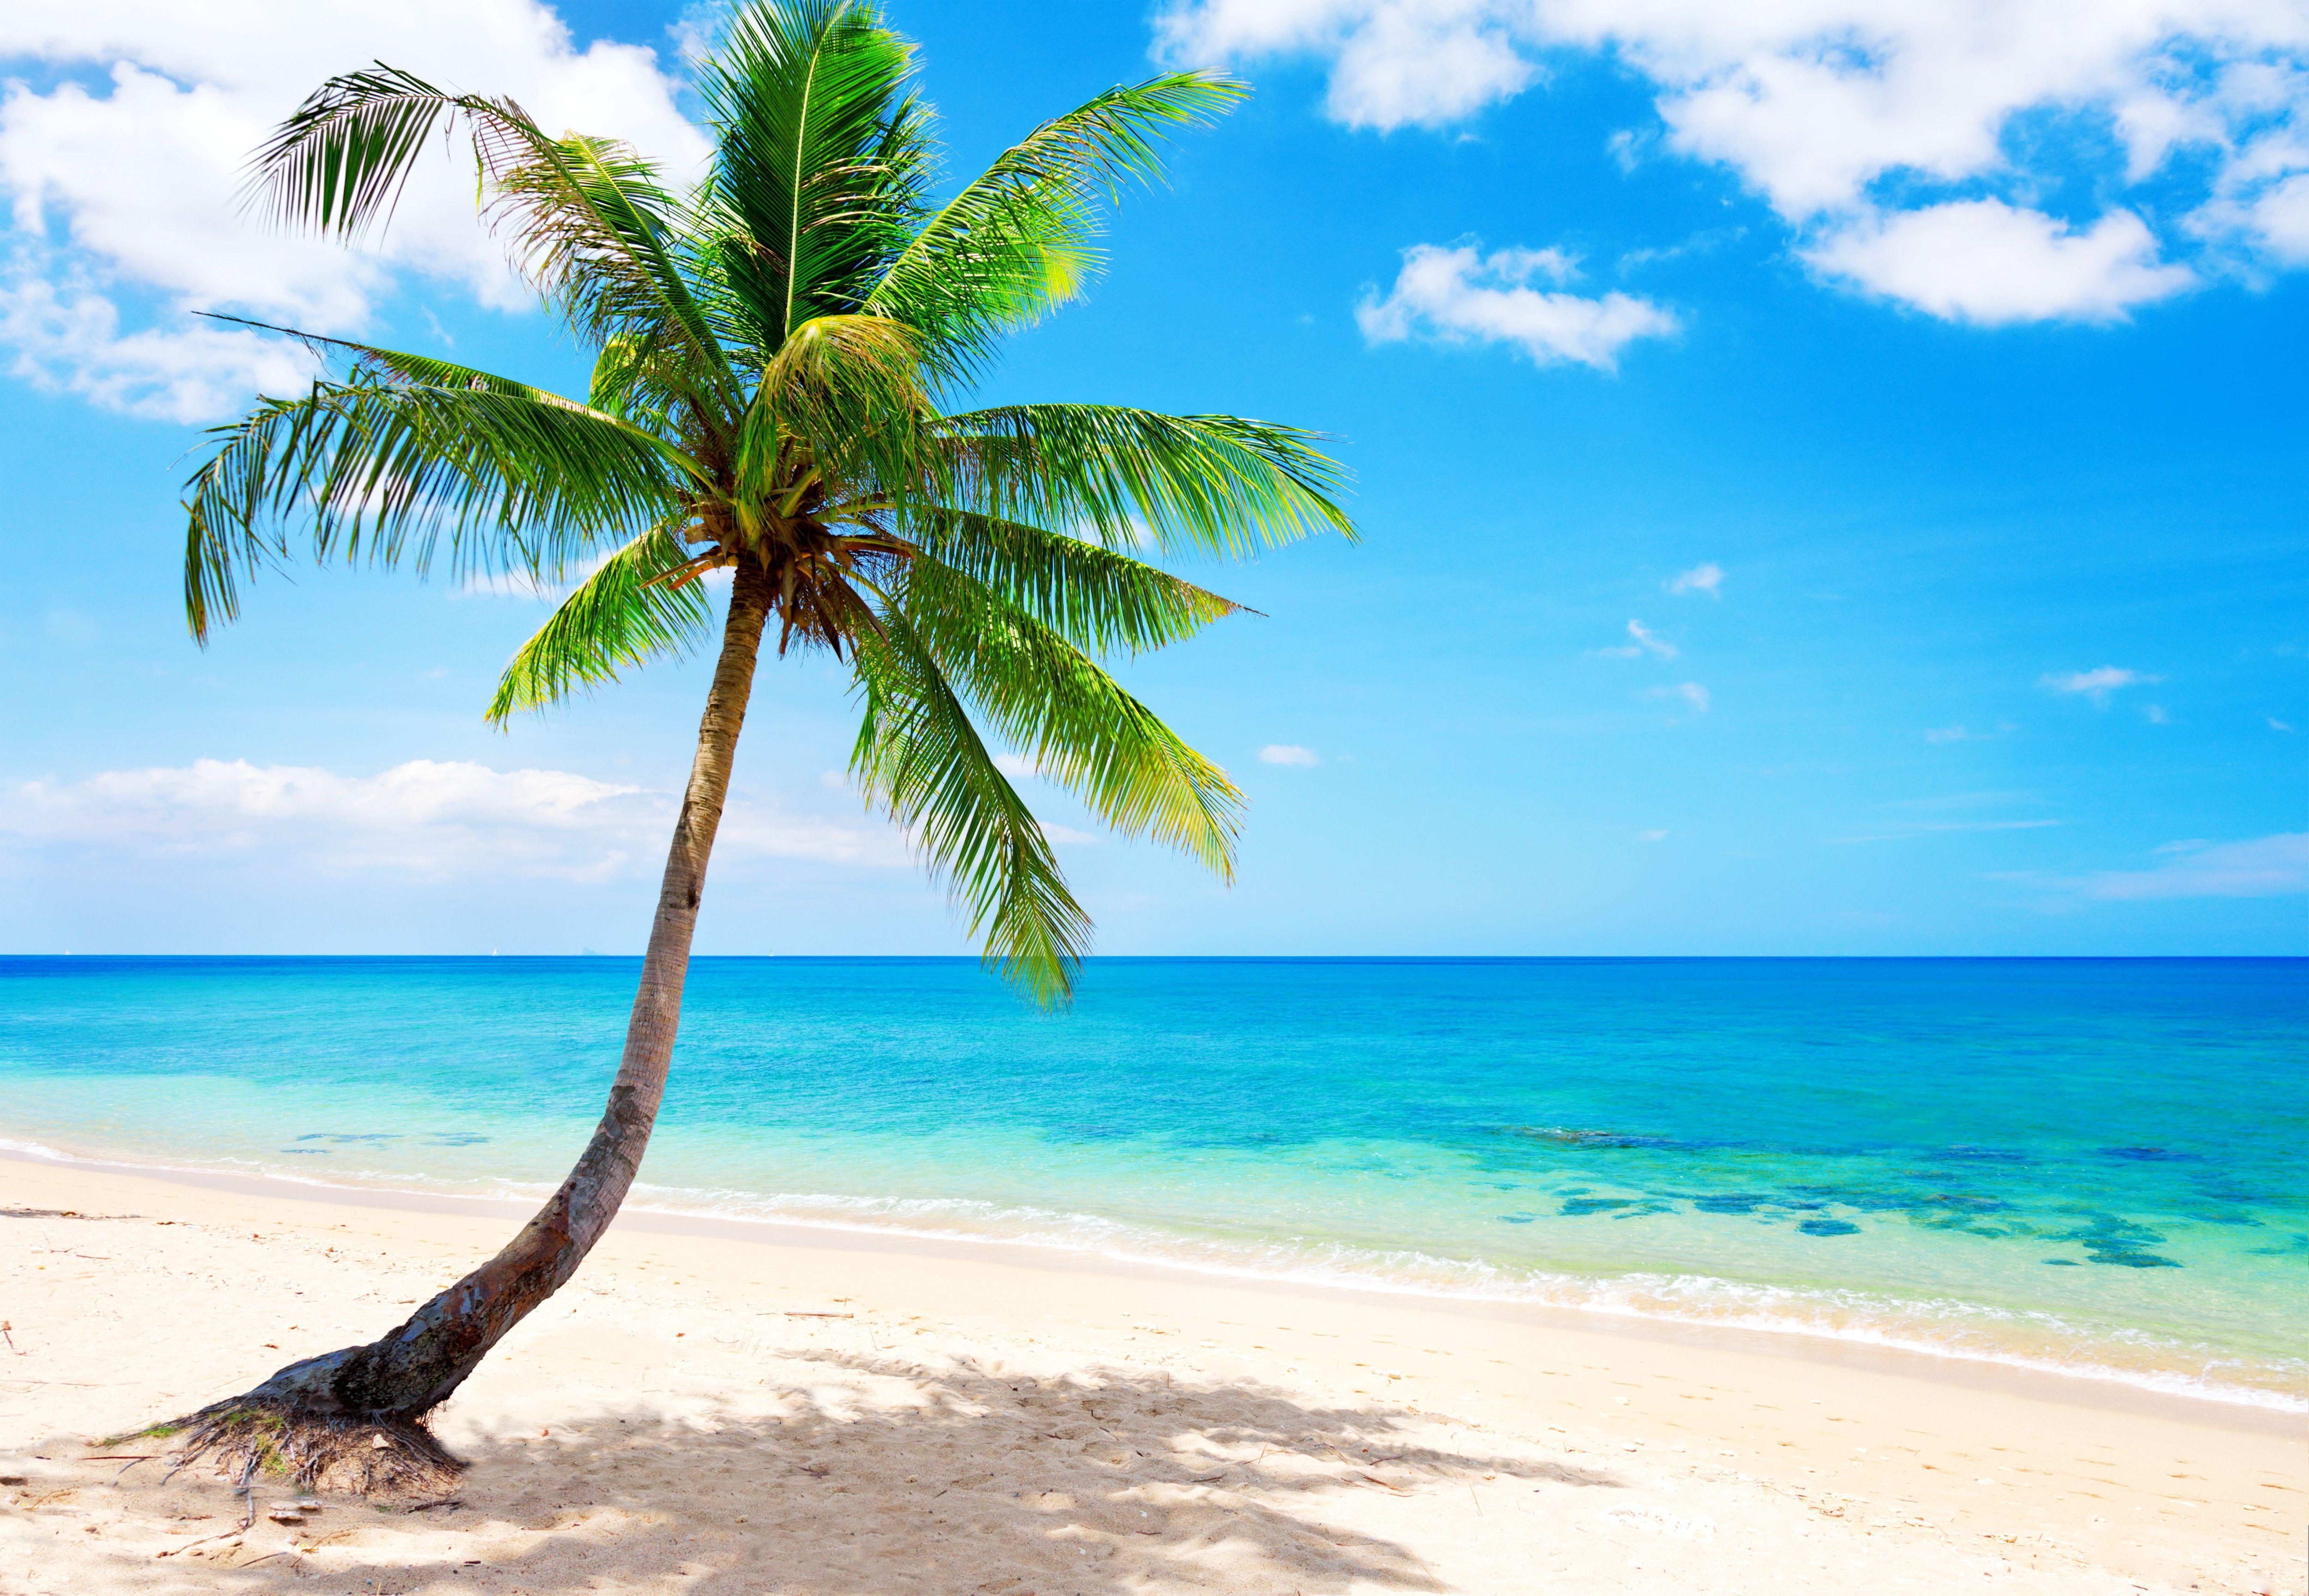 Palm Tree Beach Wallpapers - Top Free Palm Tree Beach Backgrounds - WallpaperAccess